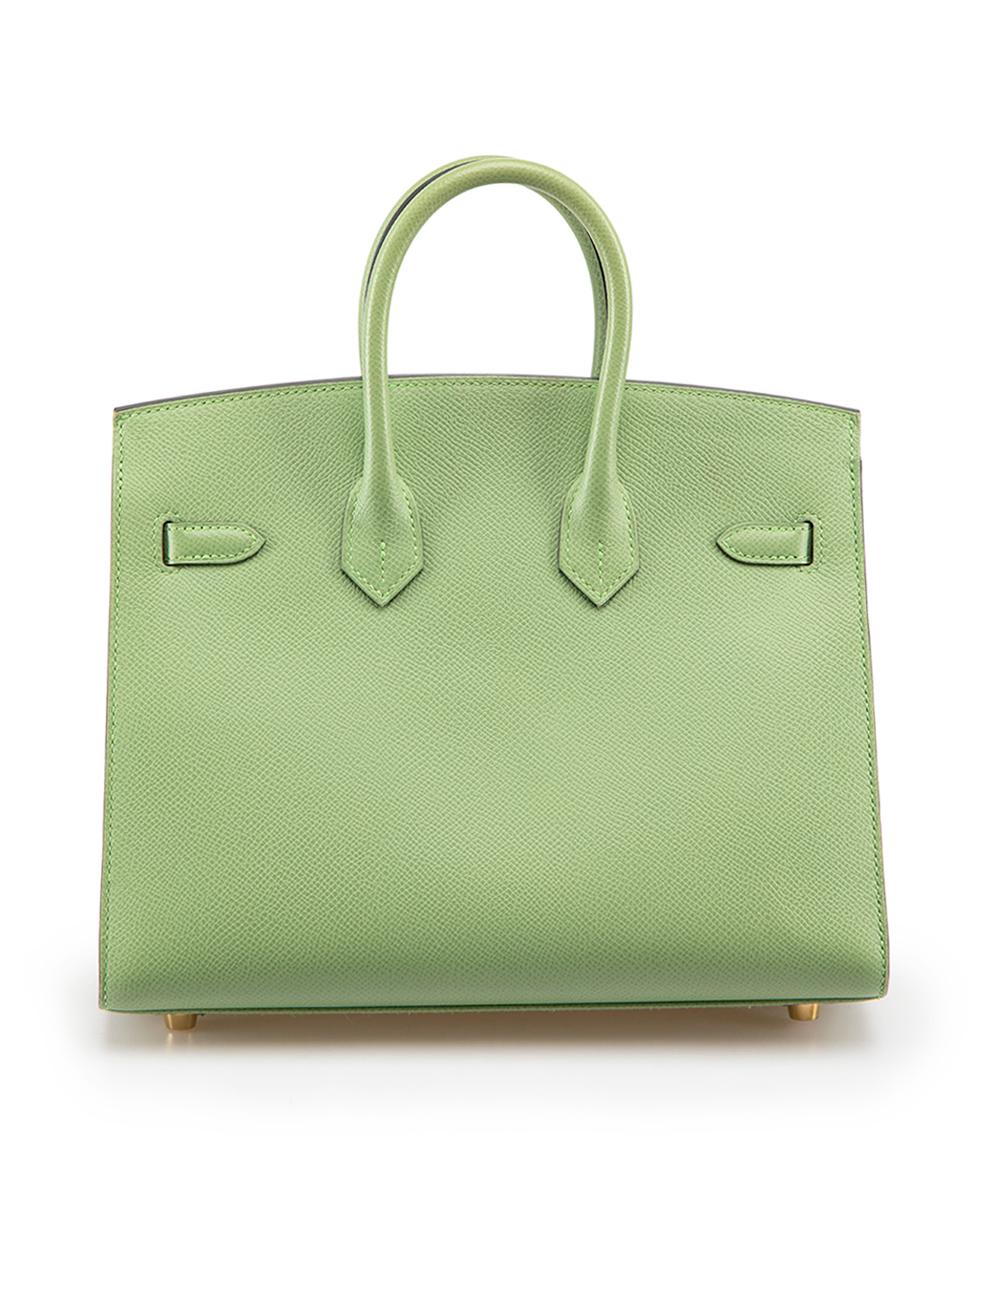 Hermès 2021 Vert Criquet Epsom Leather Sellier GHW Birkin 25 In Good Condition For Sale In London, GB